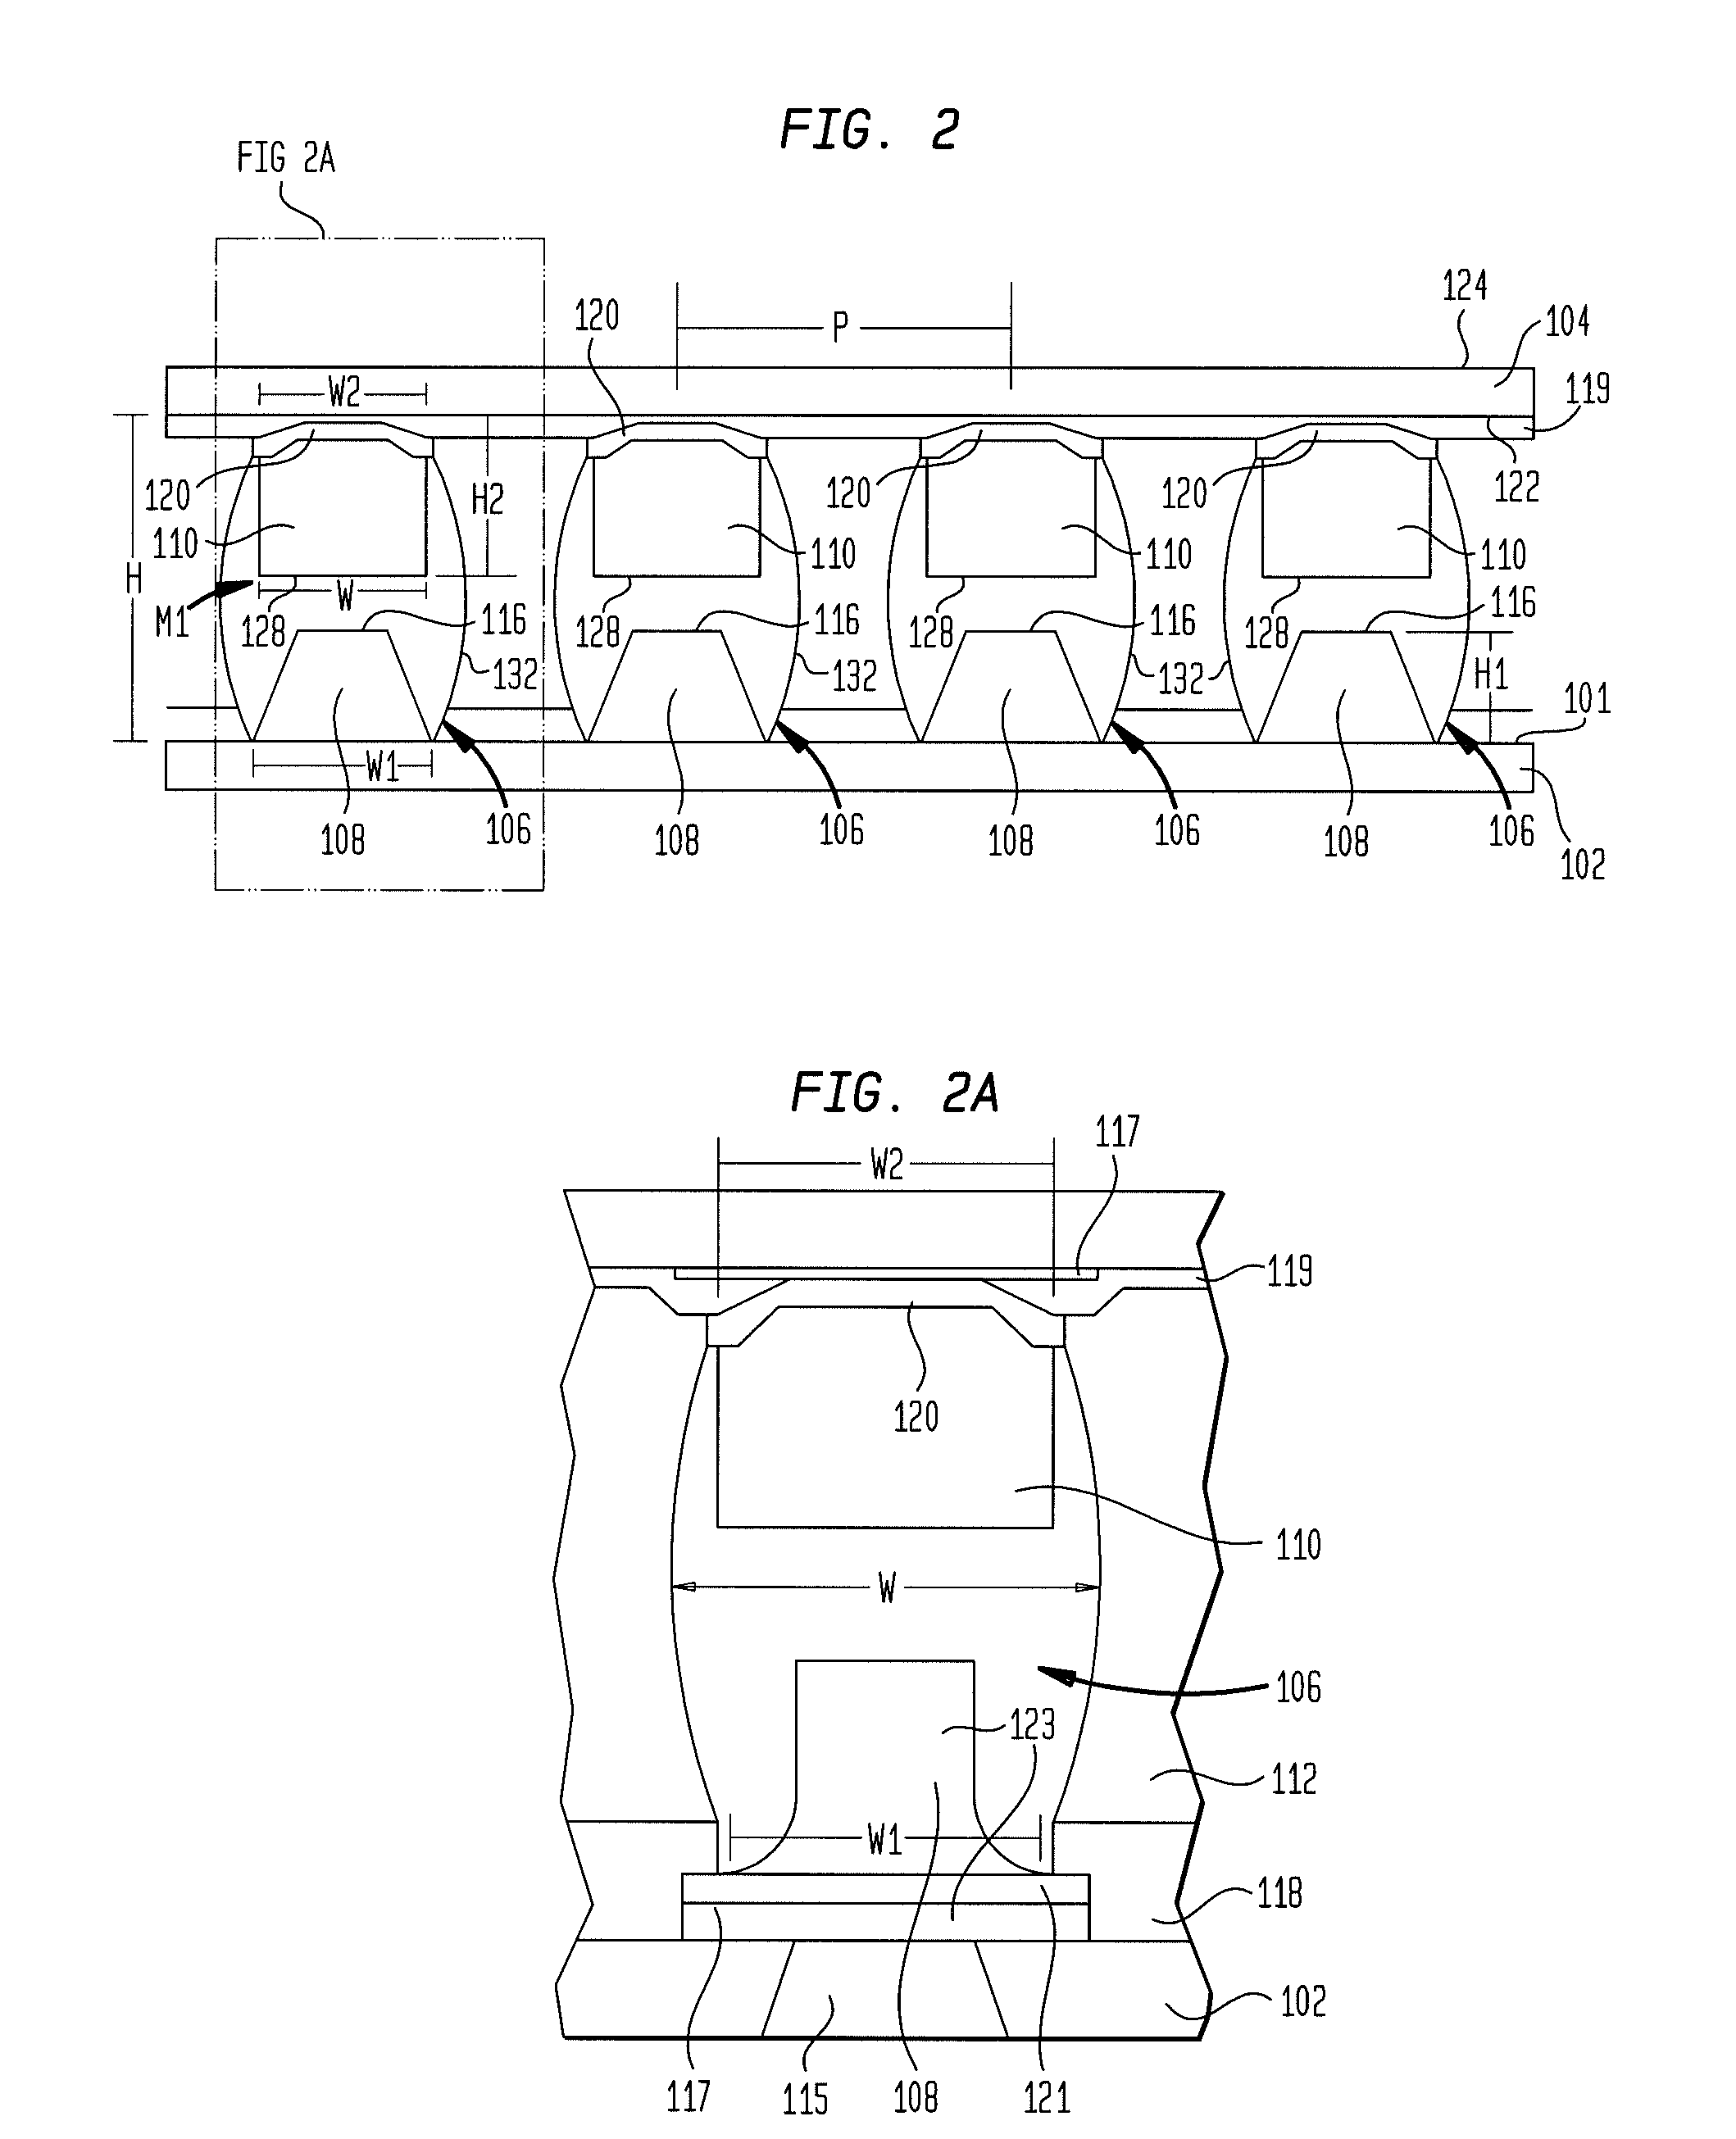 Microelectronic packages with dual or multiple-etched flip-chip connectors